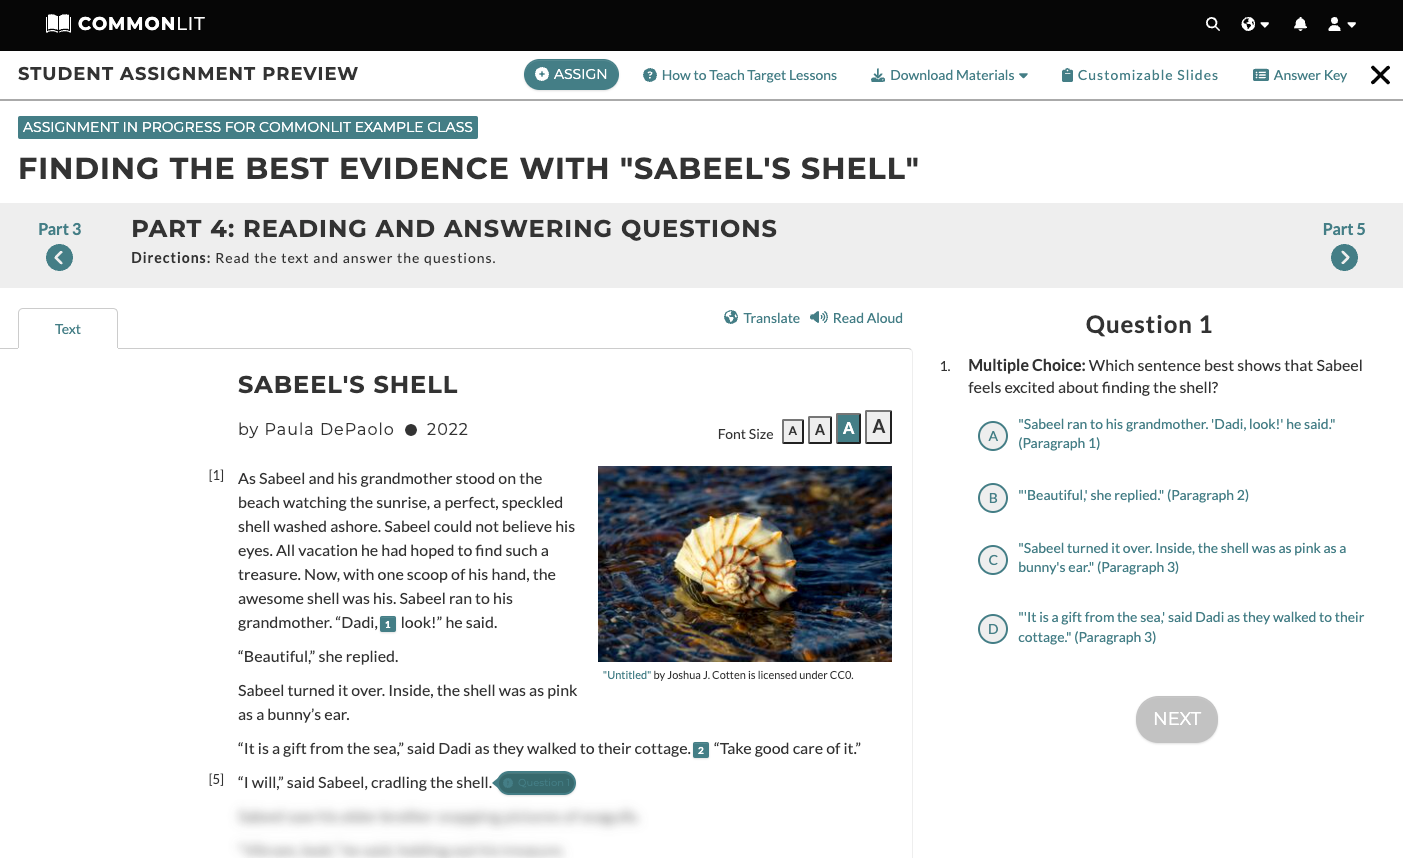 This is a screenshot from the Target Lesson "Finding the Best Evidence with 'Sabeel's Shell.'" The story is on the left and the assessment questions are on the right.